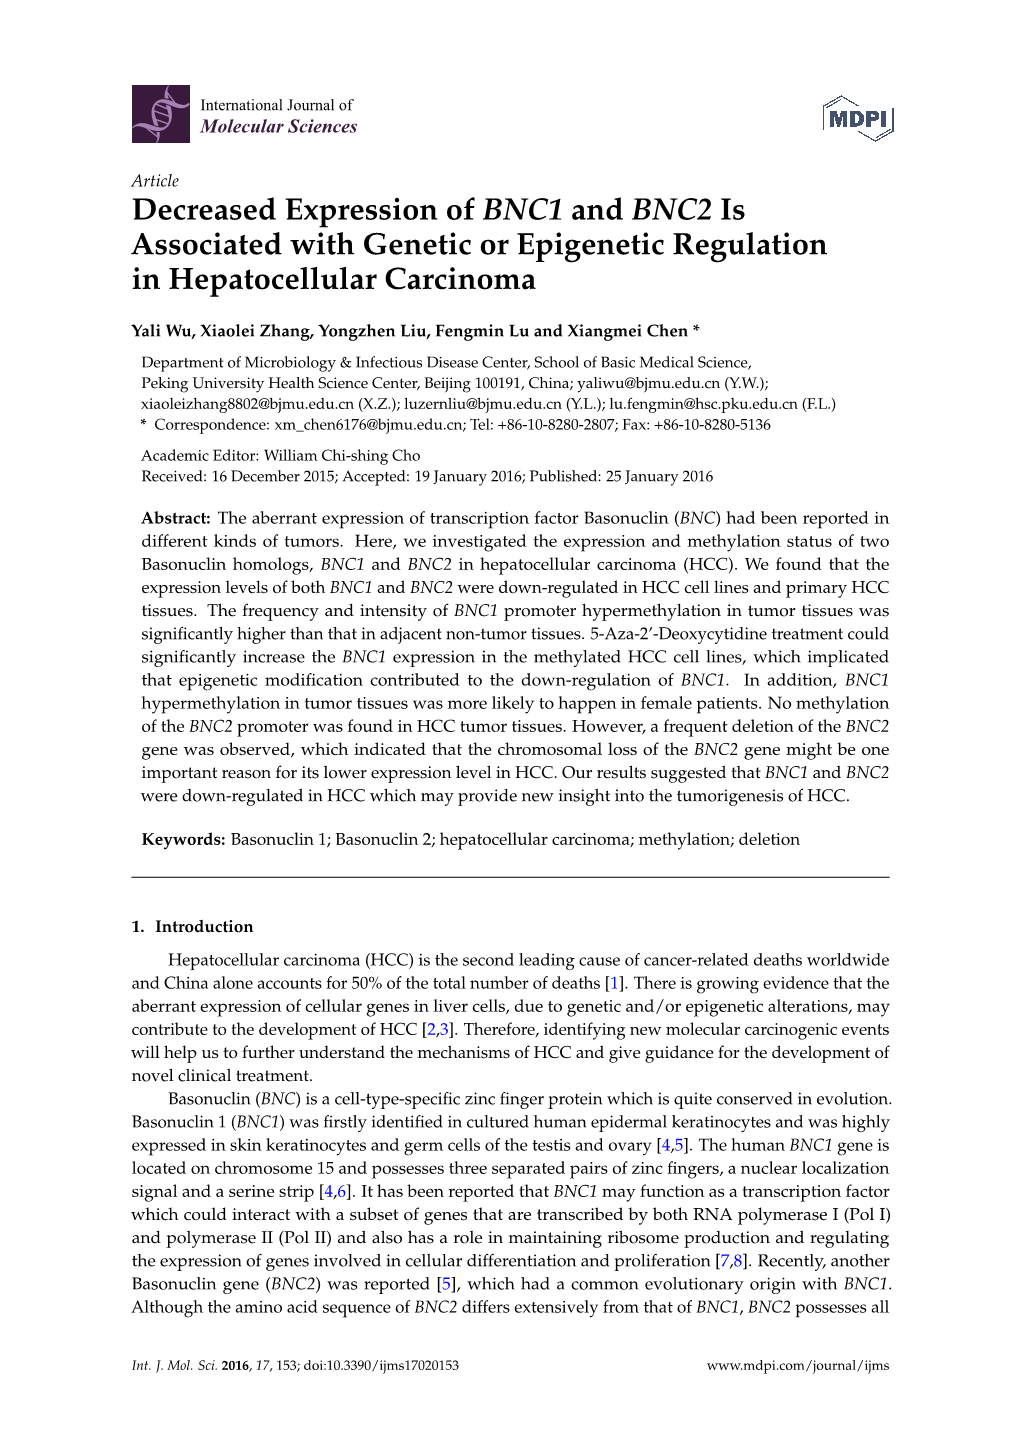 Decreased Expression of BNC1 and BNC2 Is Associated with Genetic Or Epigenetic Regulation in Hepatocellular Carcinoma